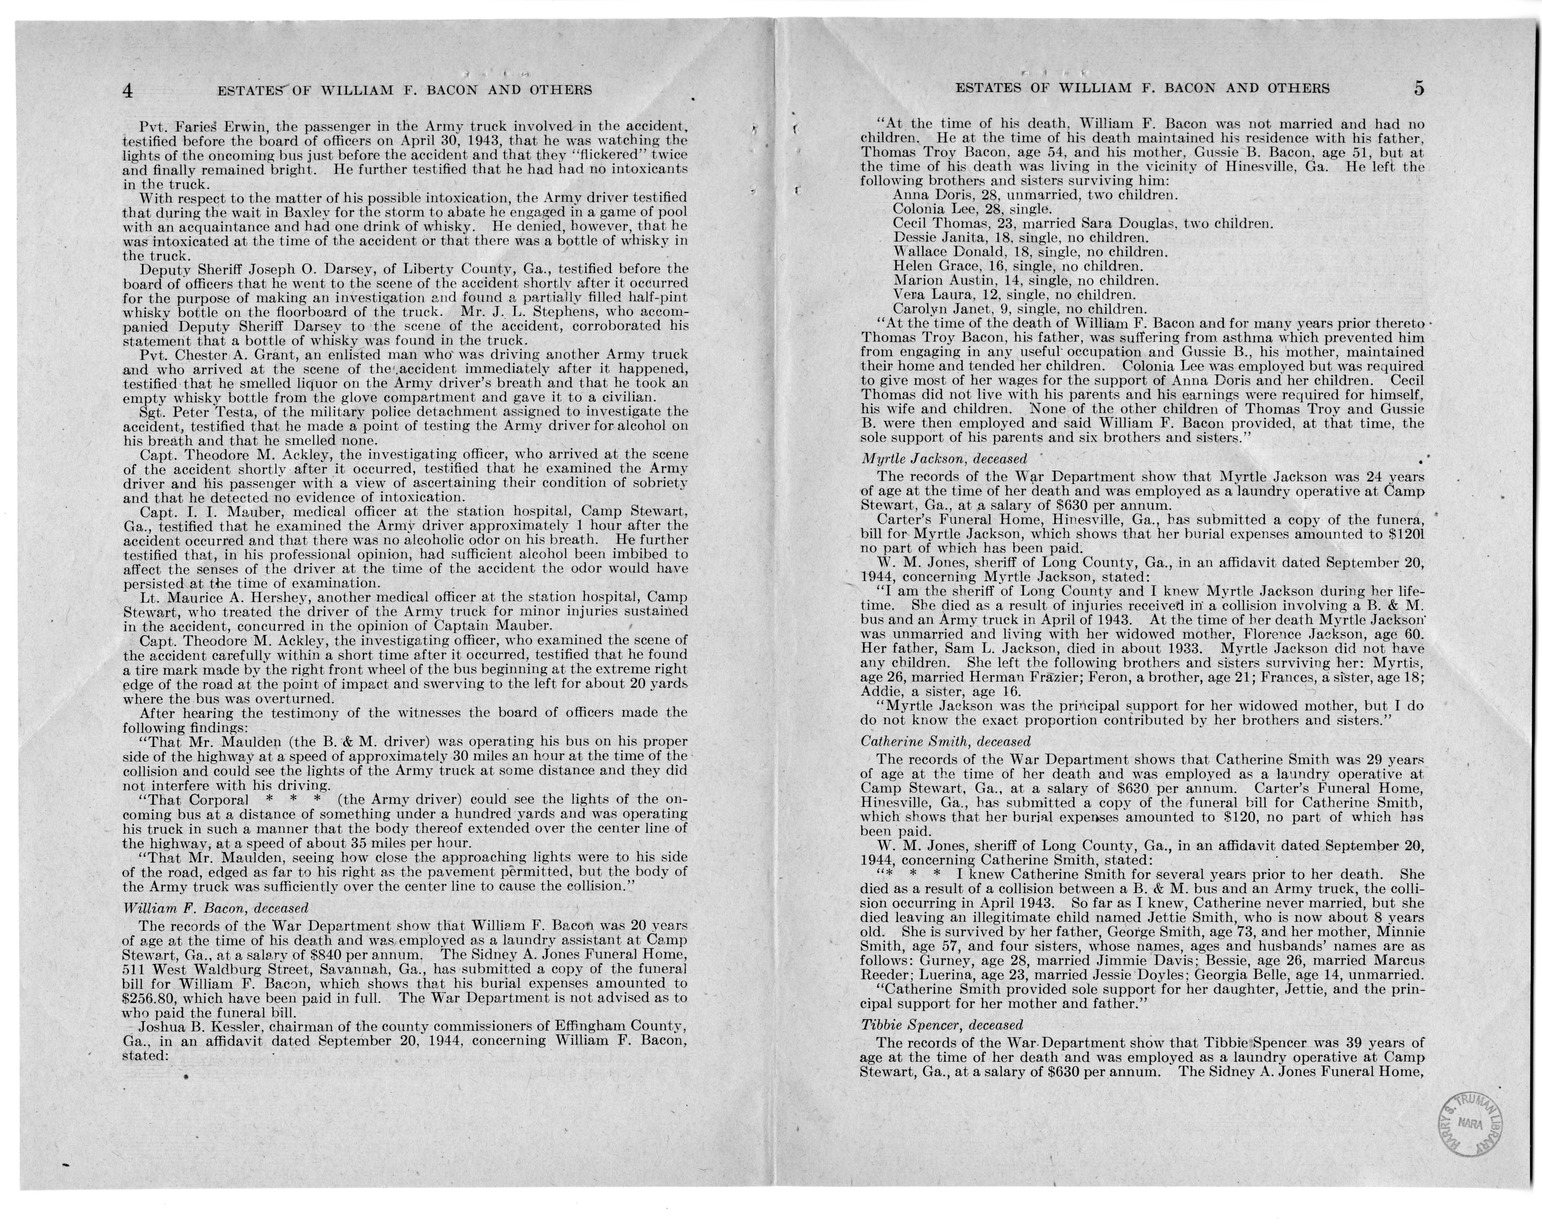 Memorandum from Frederick J. Bailey to M. C. Latta, S. 201, For the Relief of the Estates of William F. Bacon, Myrtle Jackson, Catherine Smith, and Tibbie Spencer, with Attachments